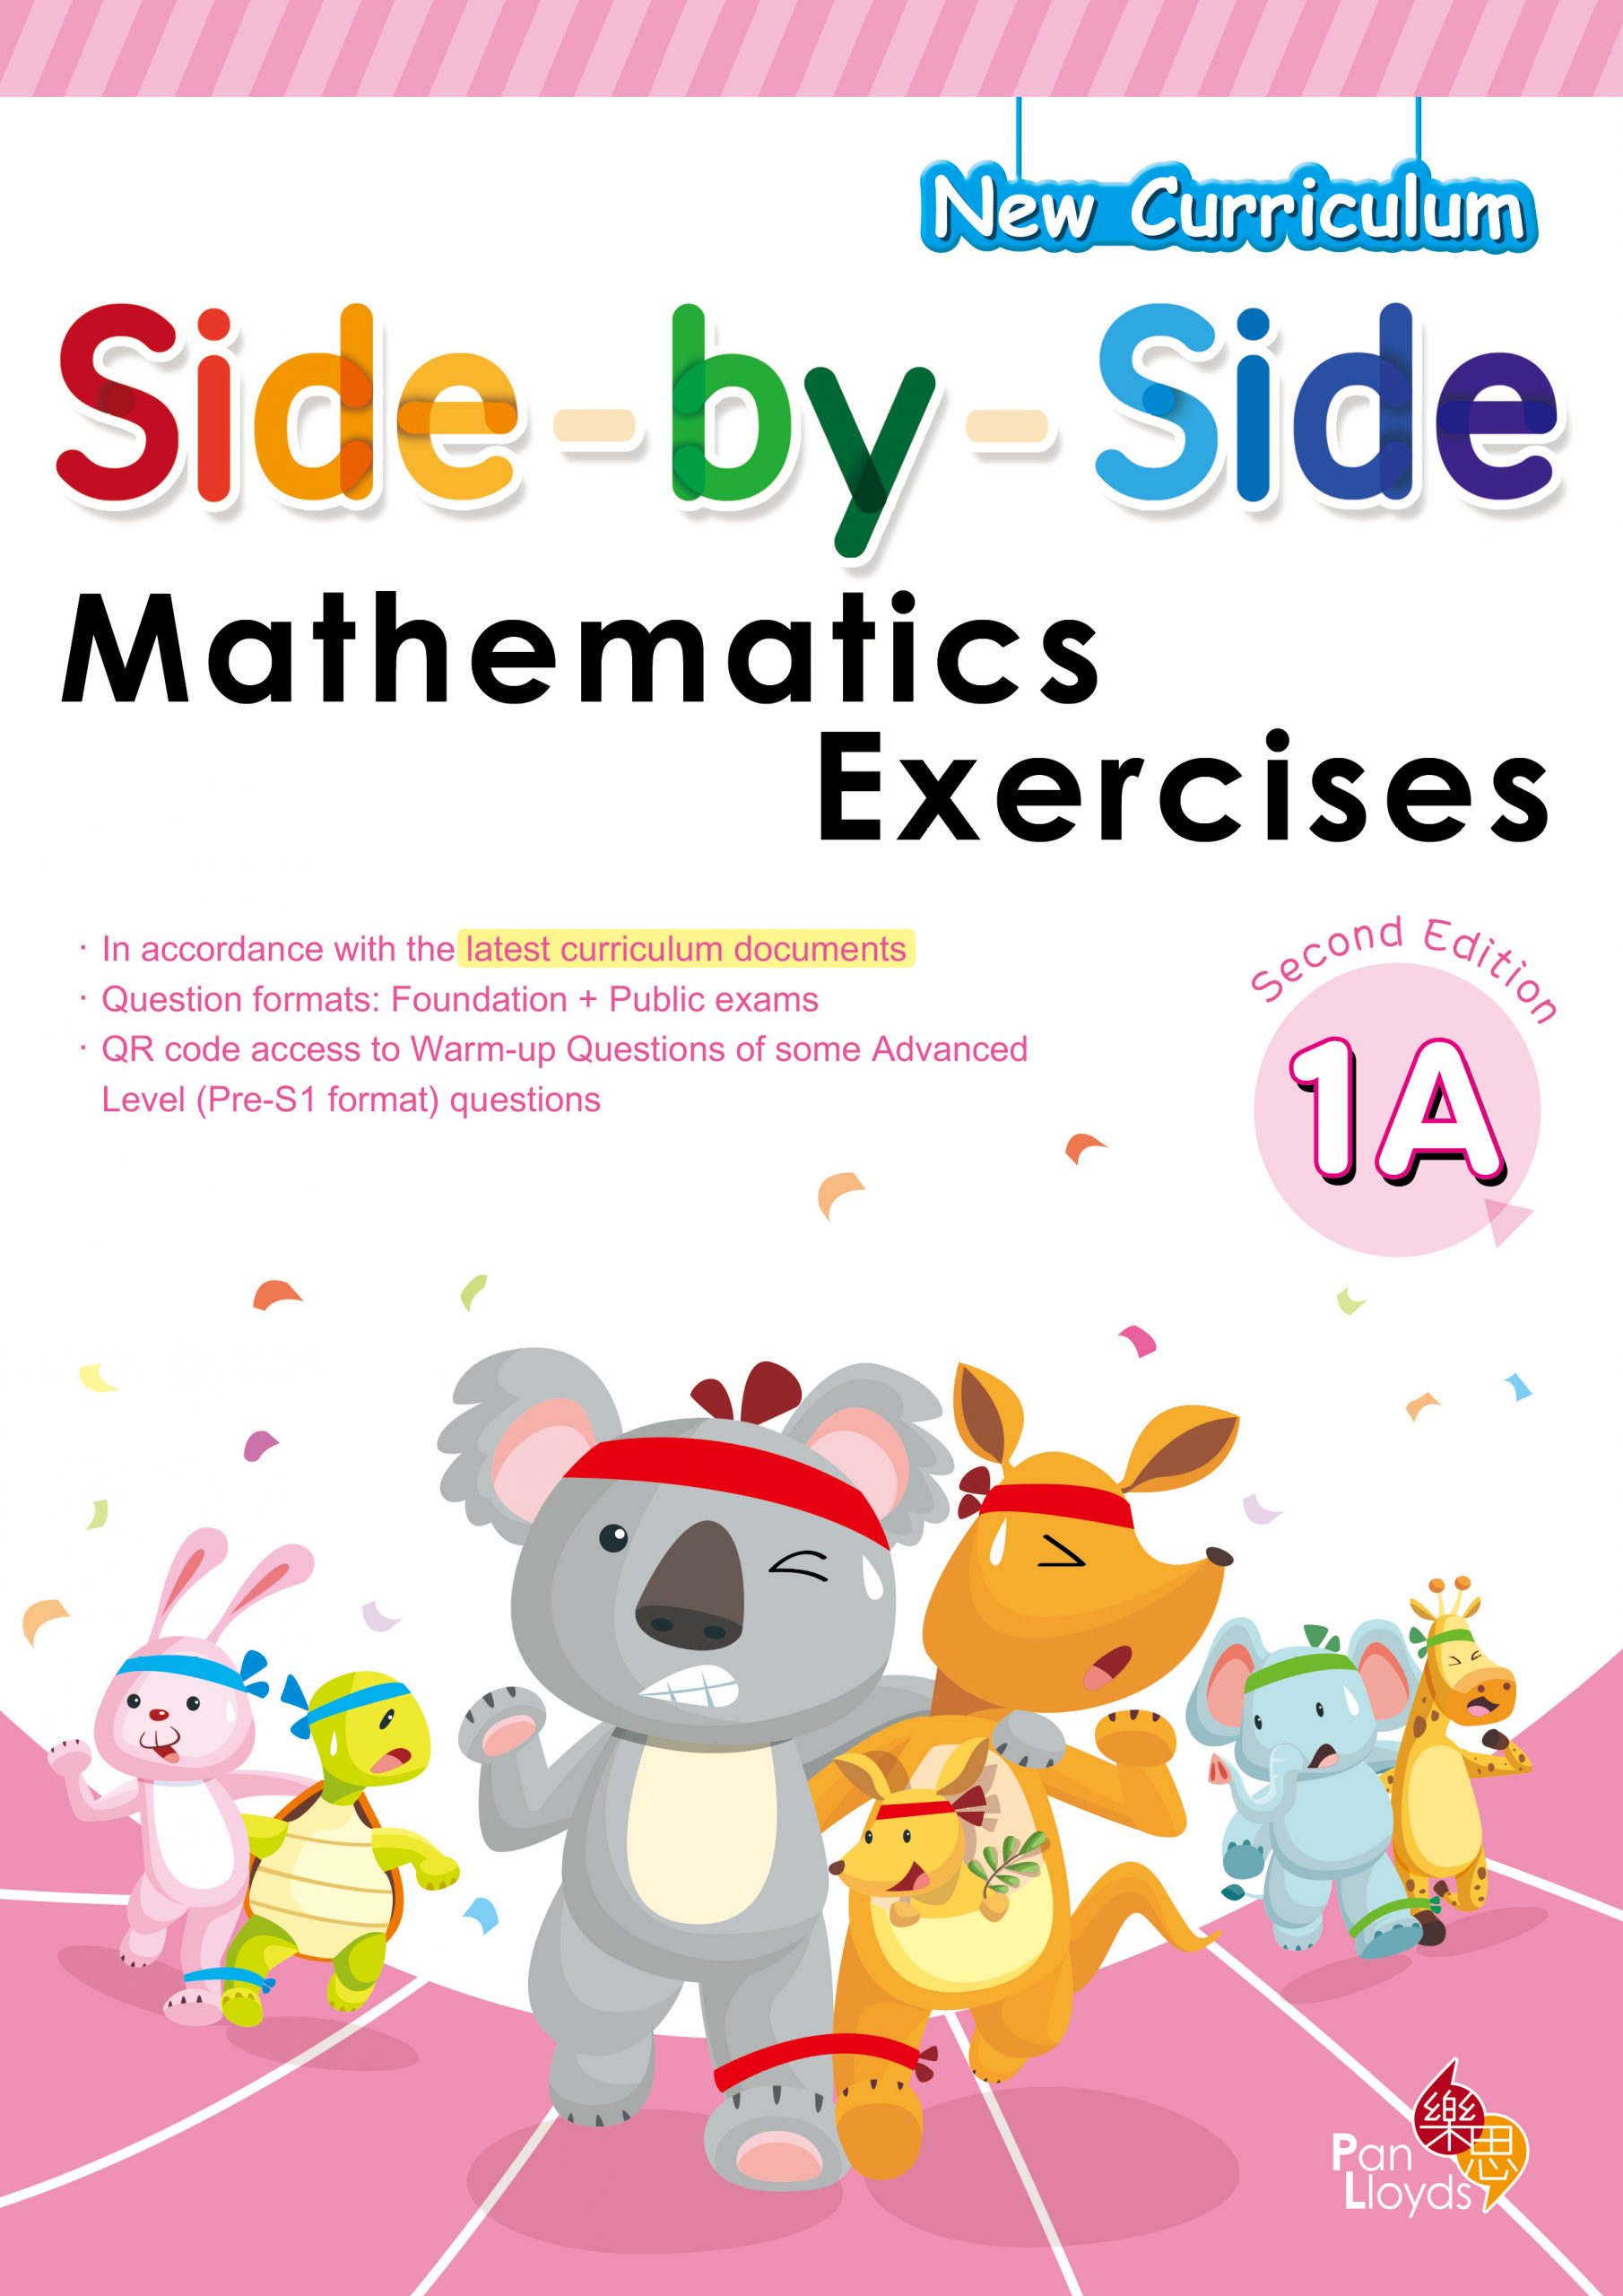 Side by side Mathematics Exercises (2nd Edition)